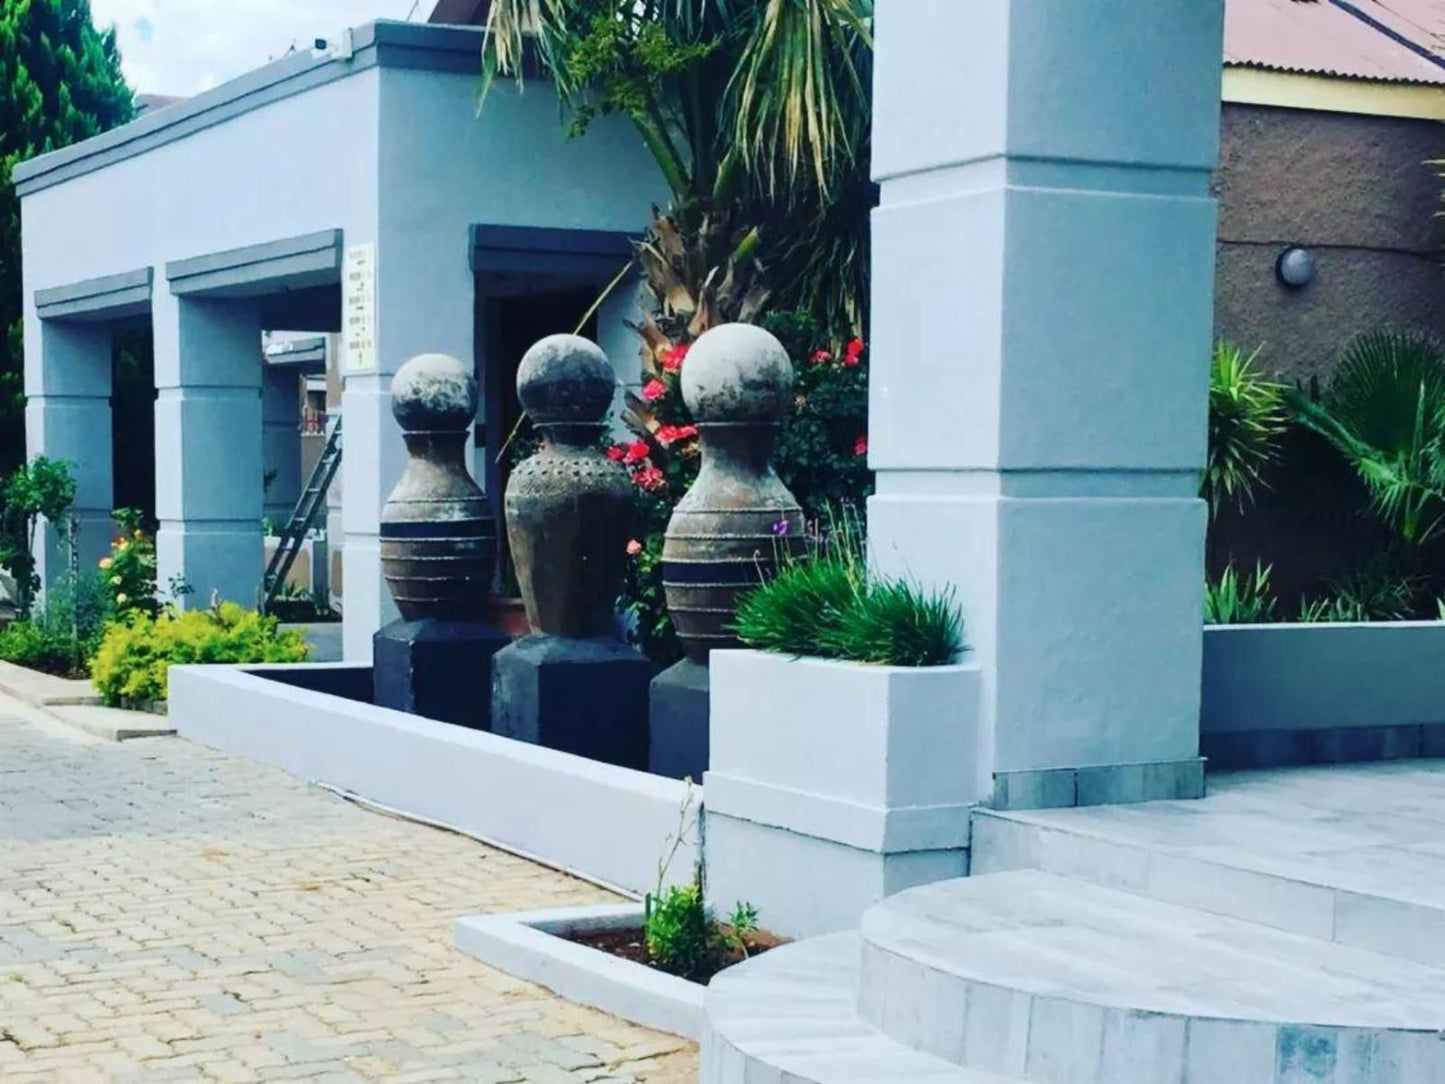 Times Premier Town Lodge Vryburg North West Province South Africa House, Building, Architecture, Palm Tree, Plant, Nature, Wood, Statue, Art